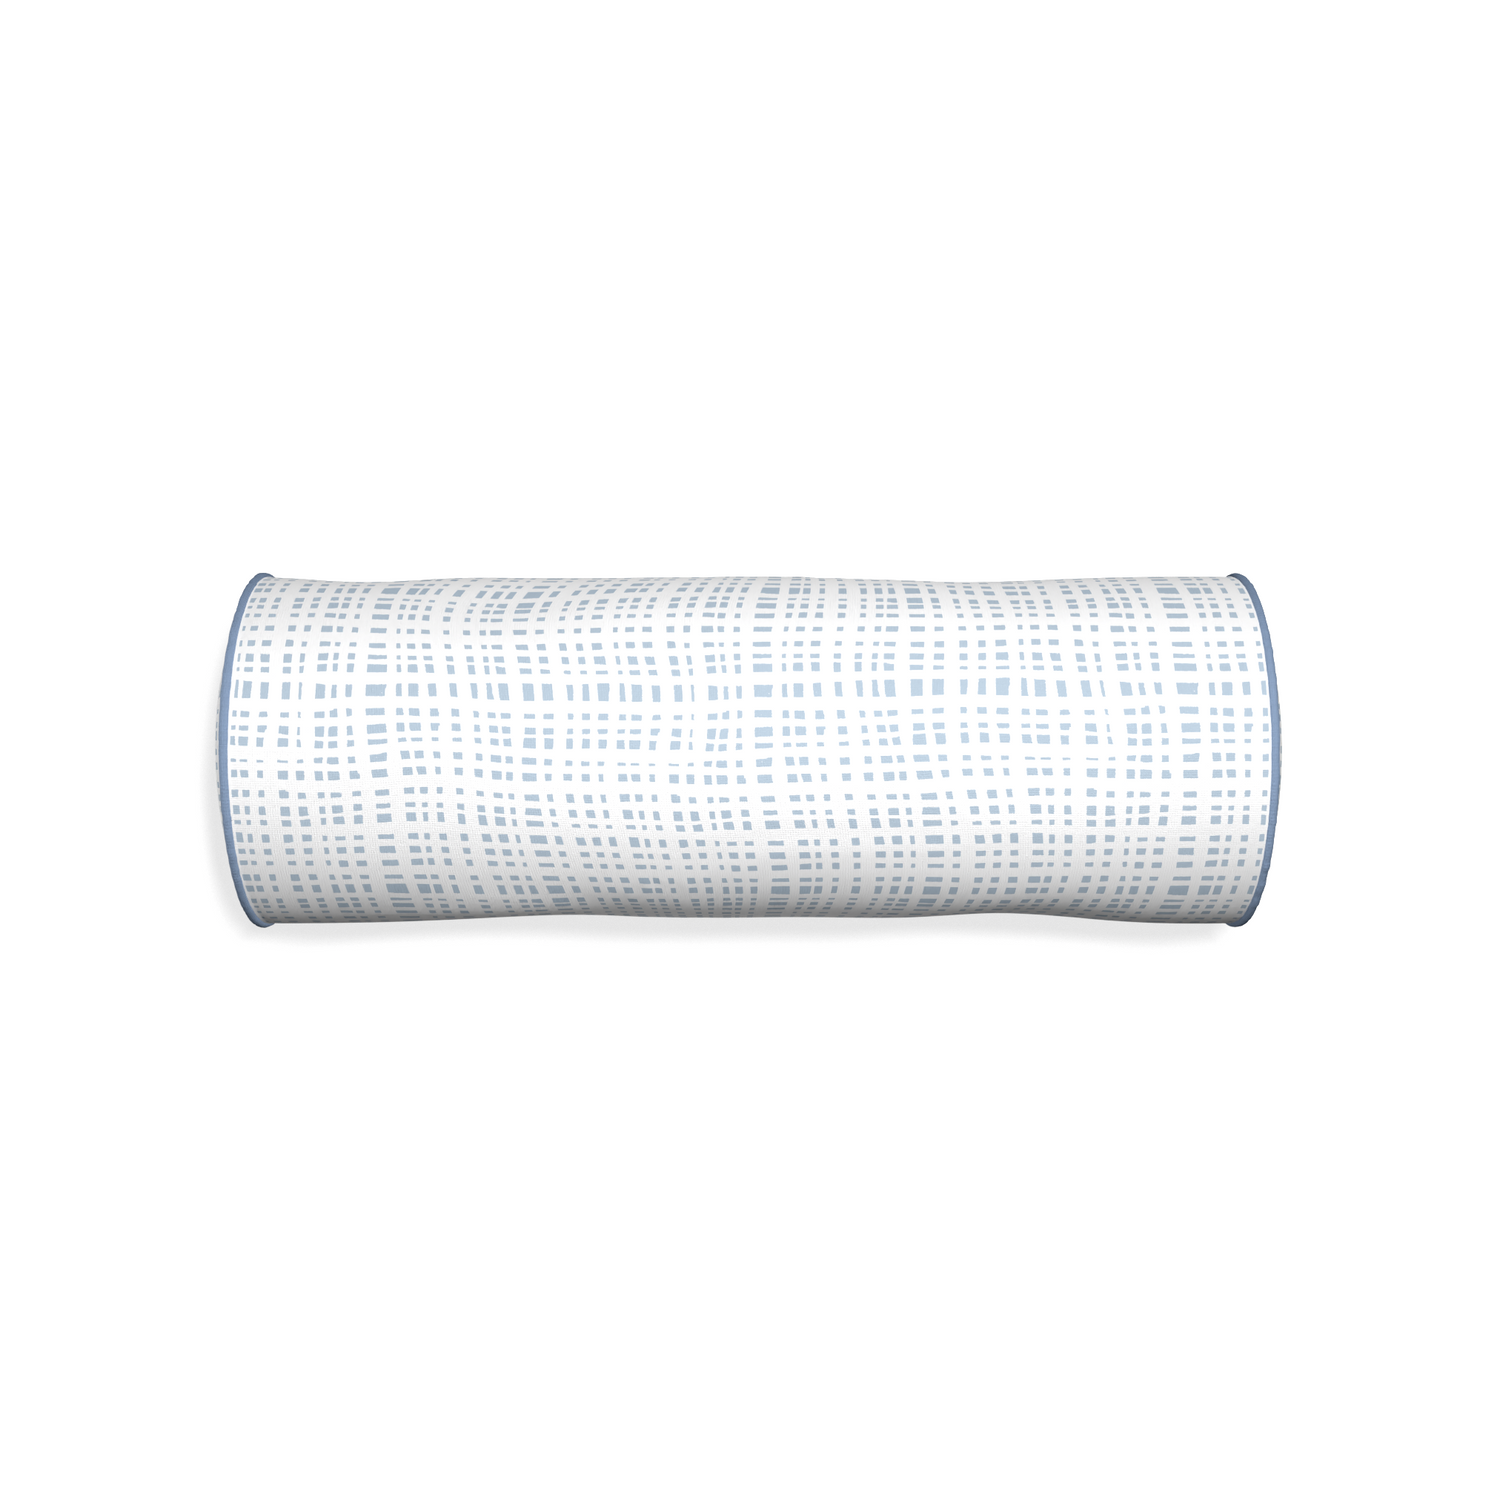 Bolster ginger sky custom plaid sky bluepillow with sky piping on white background